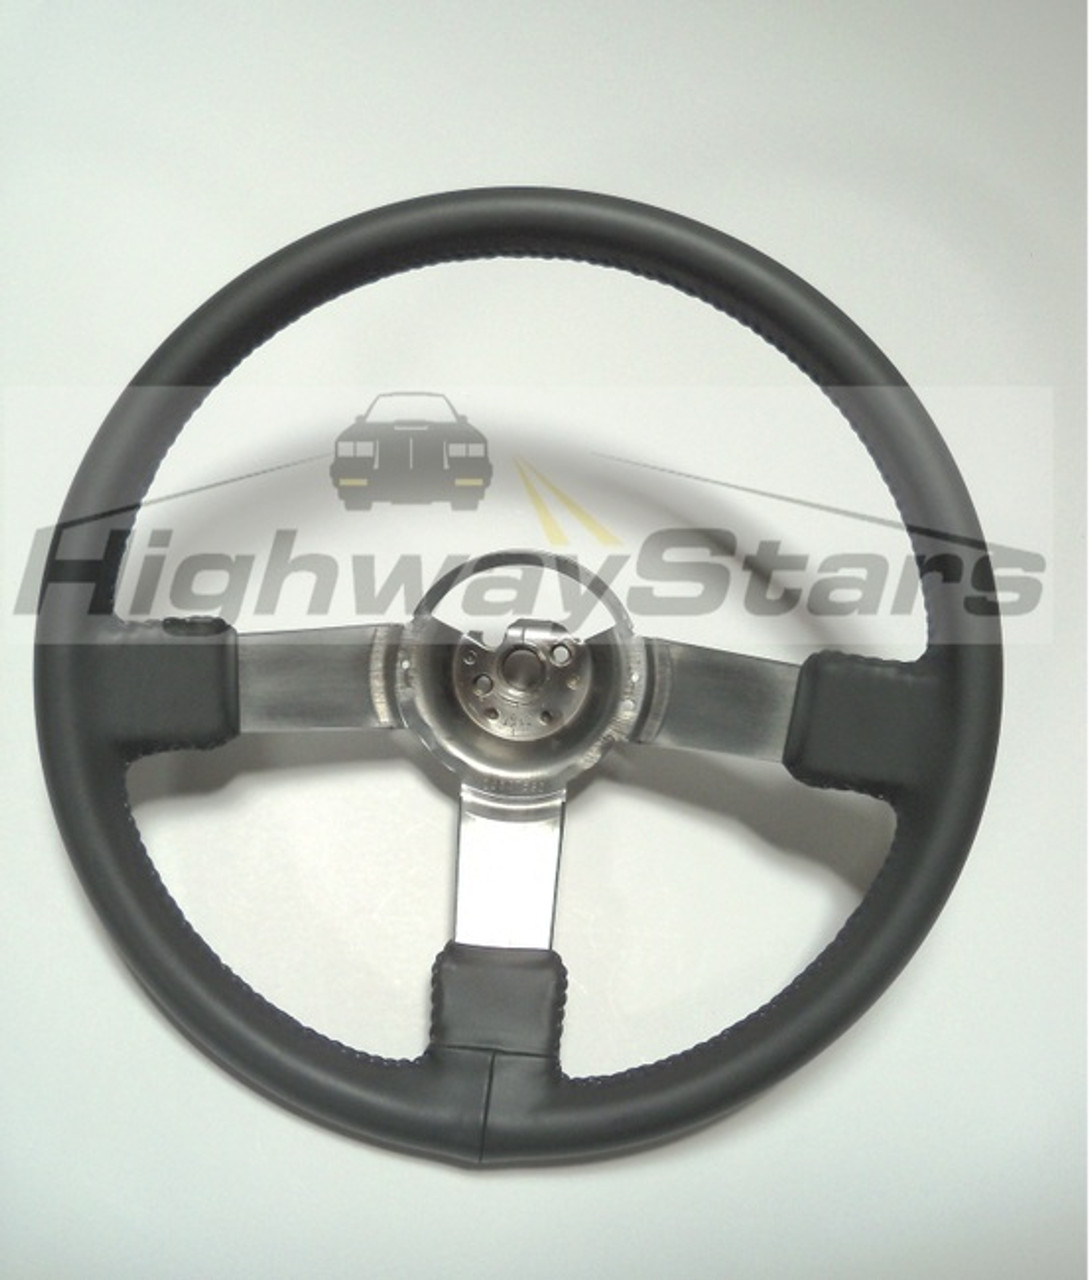 Recover a  1984 1985 1986 1987 Buick Turbo Regal Grand National Steering wheel